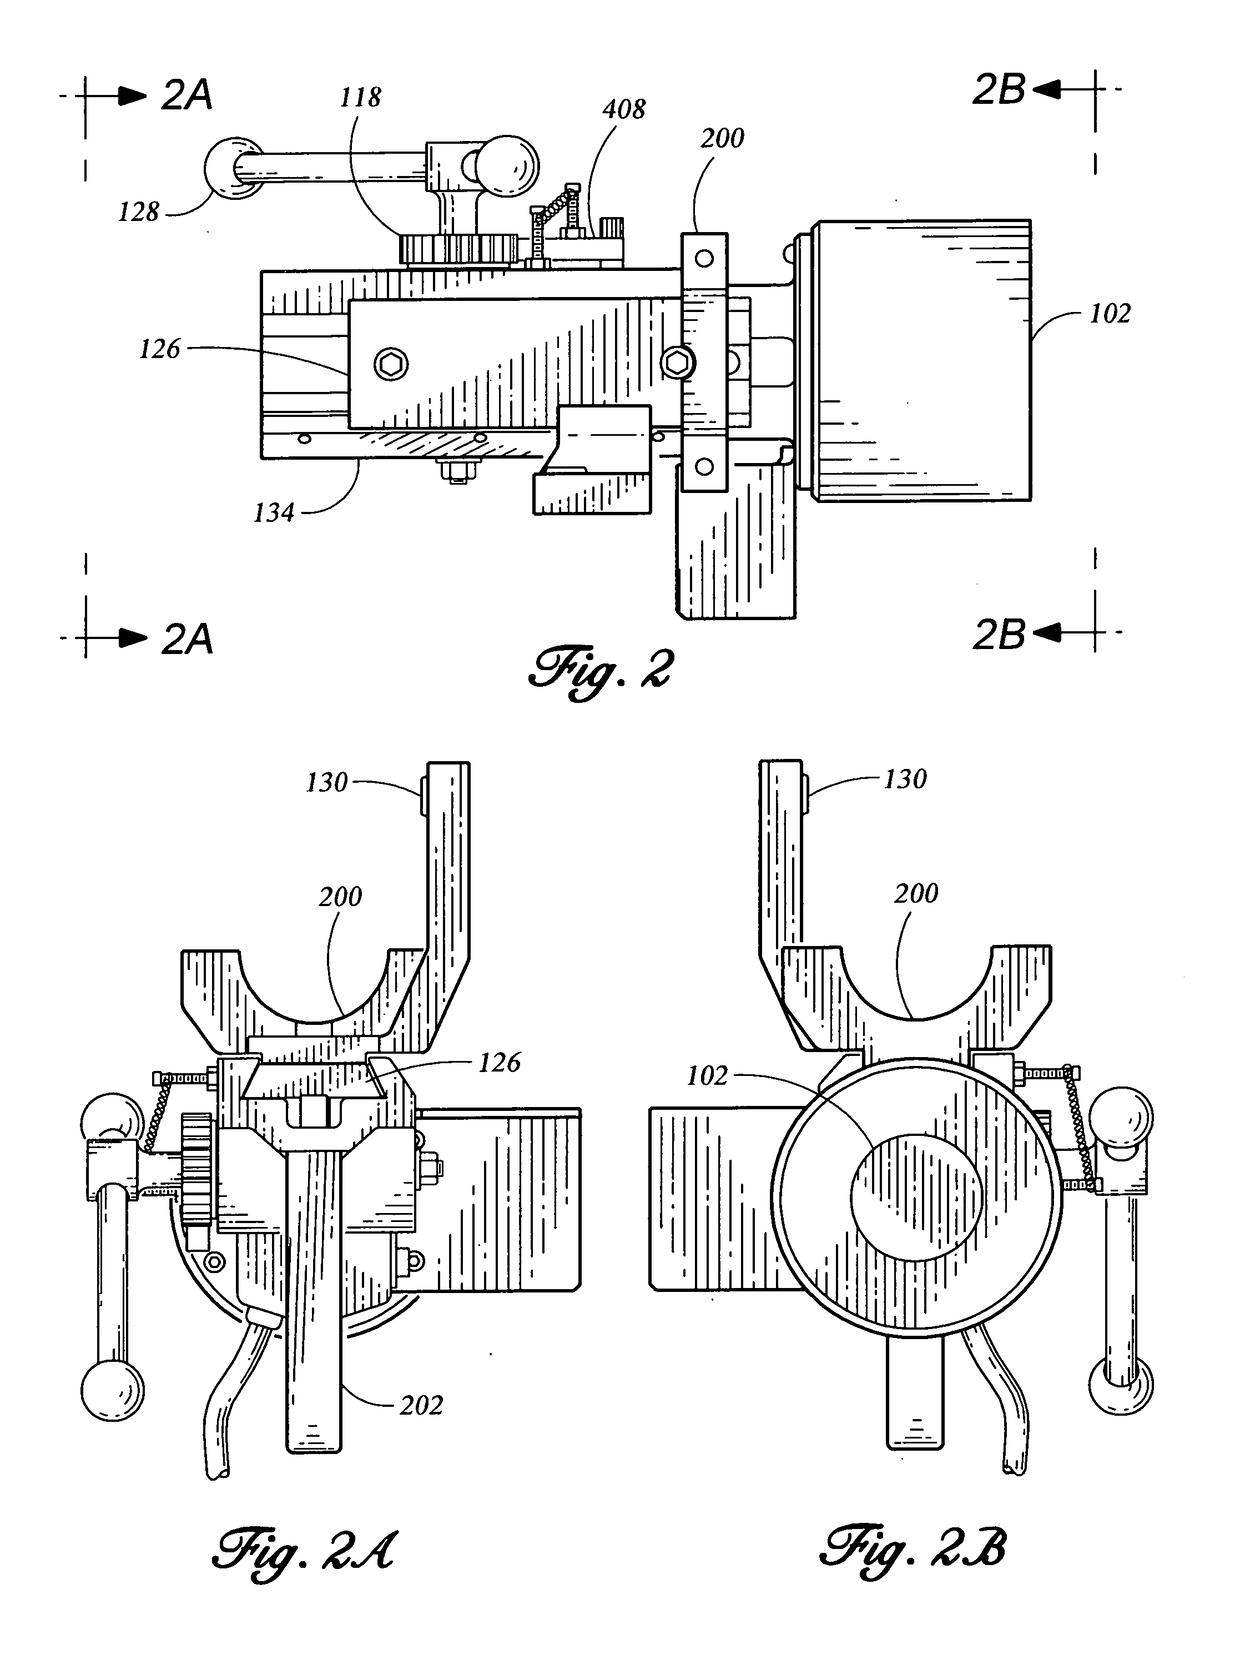 Device, system, and method for cleaning the interior of the tubes in air-cooled heat exchangers